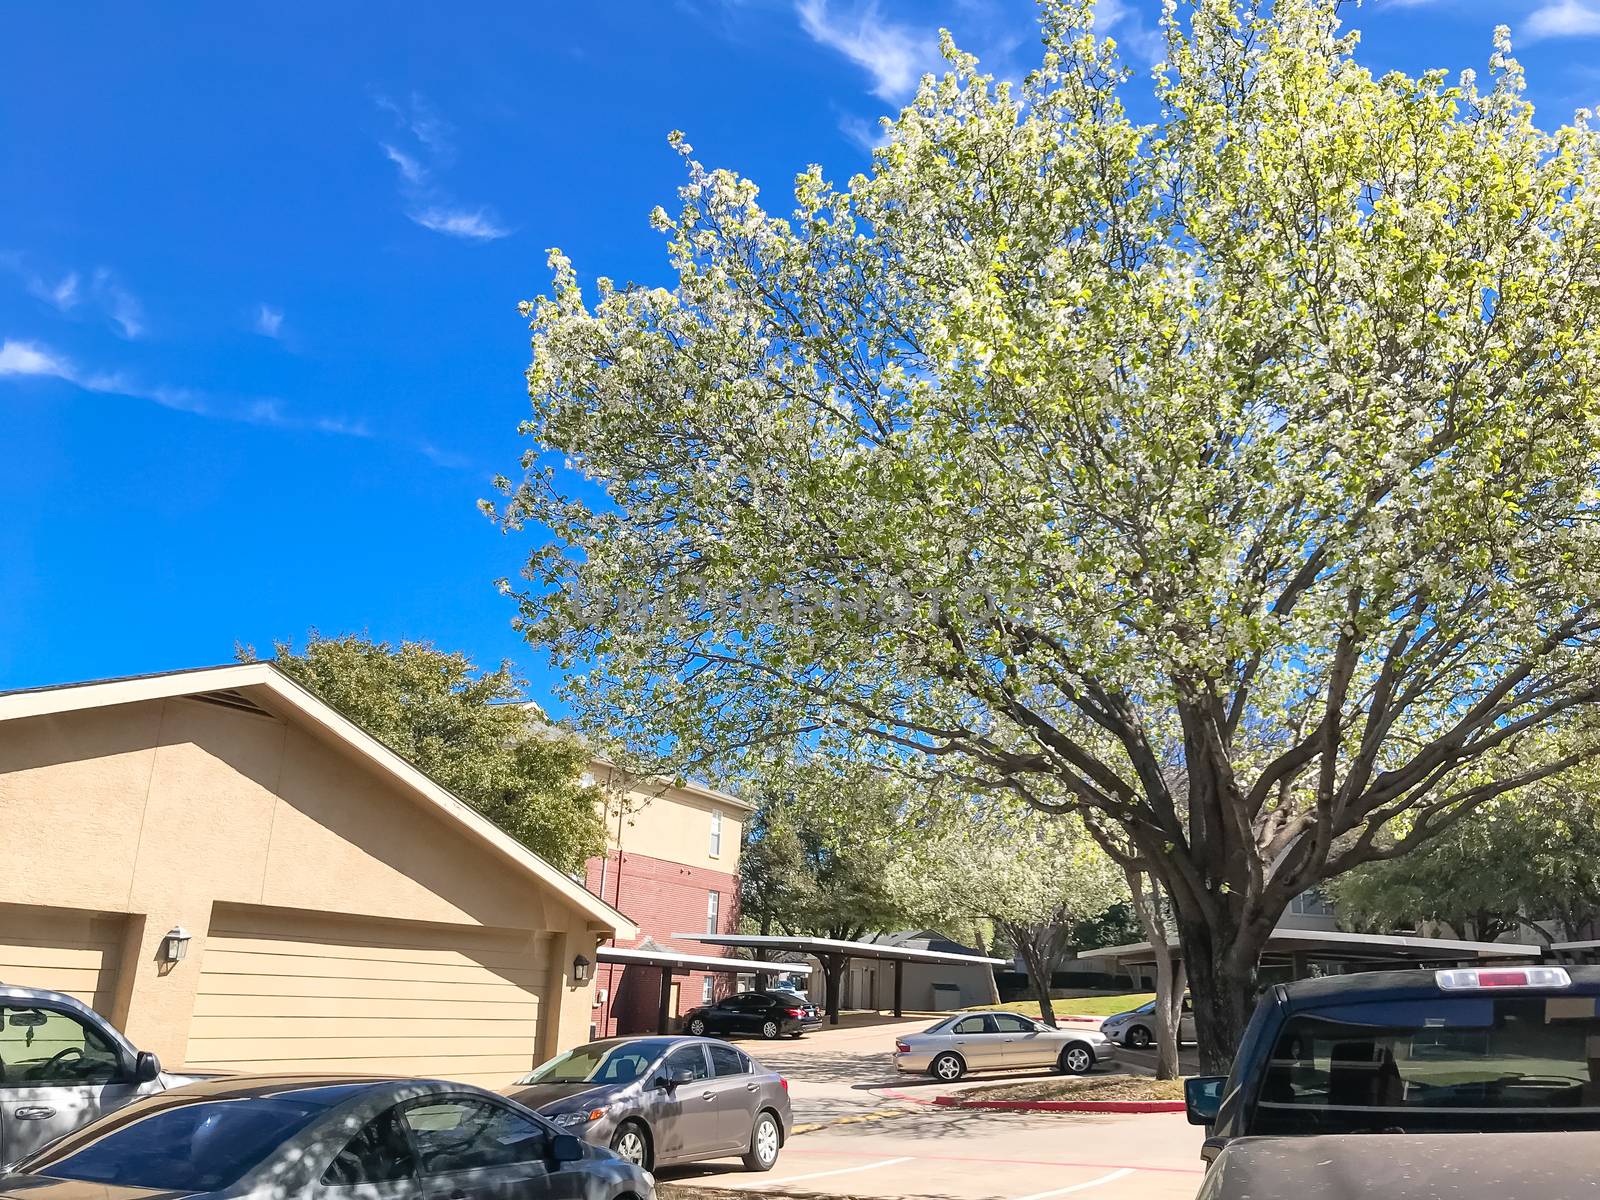 Springtime in North Texas, USA with blooming Bradford Pear tree in apartment building complex. Sunny day with white clouds and blue sky, covered parking space in rental real estate